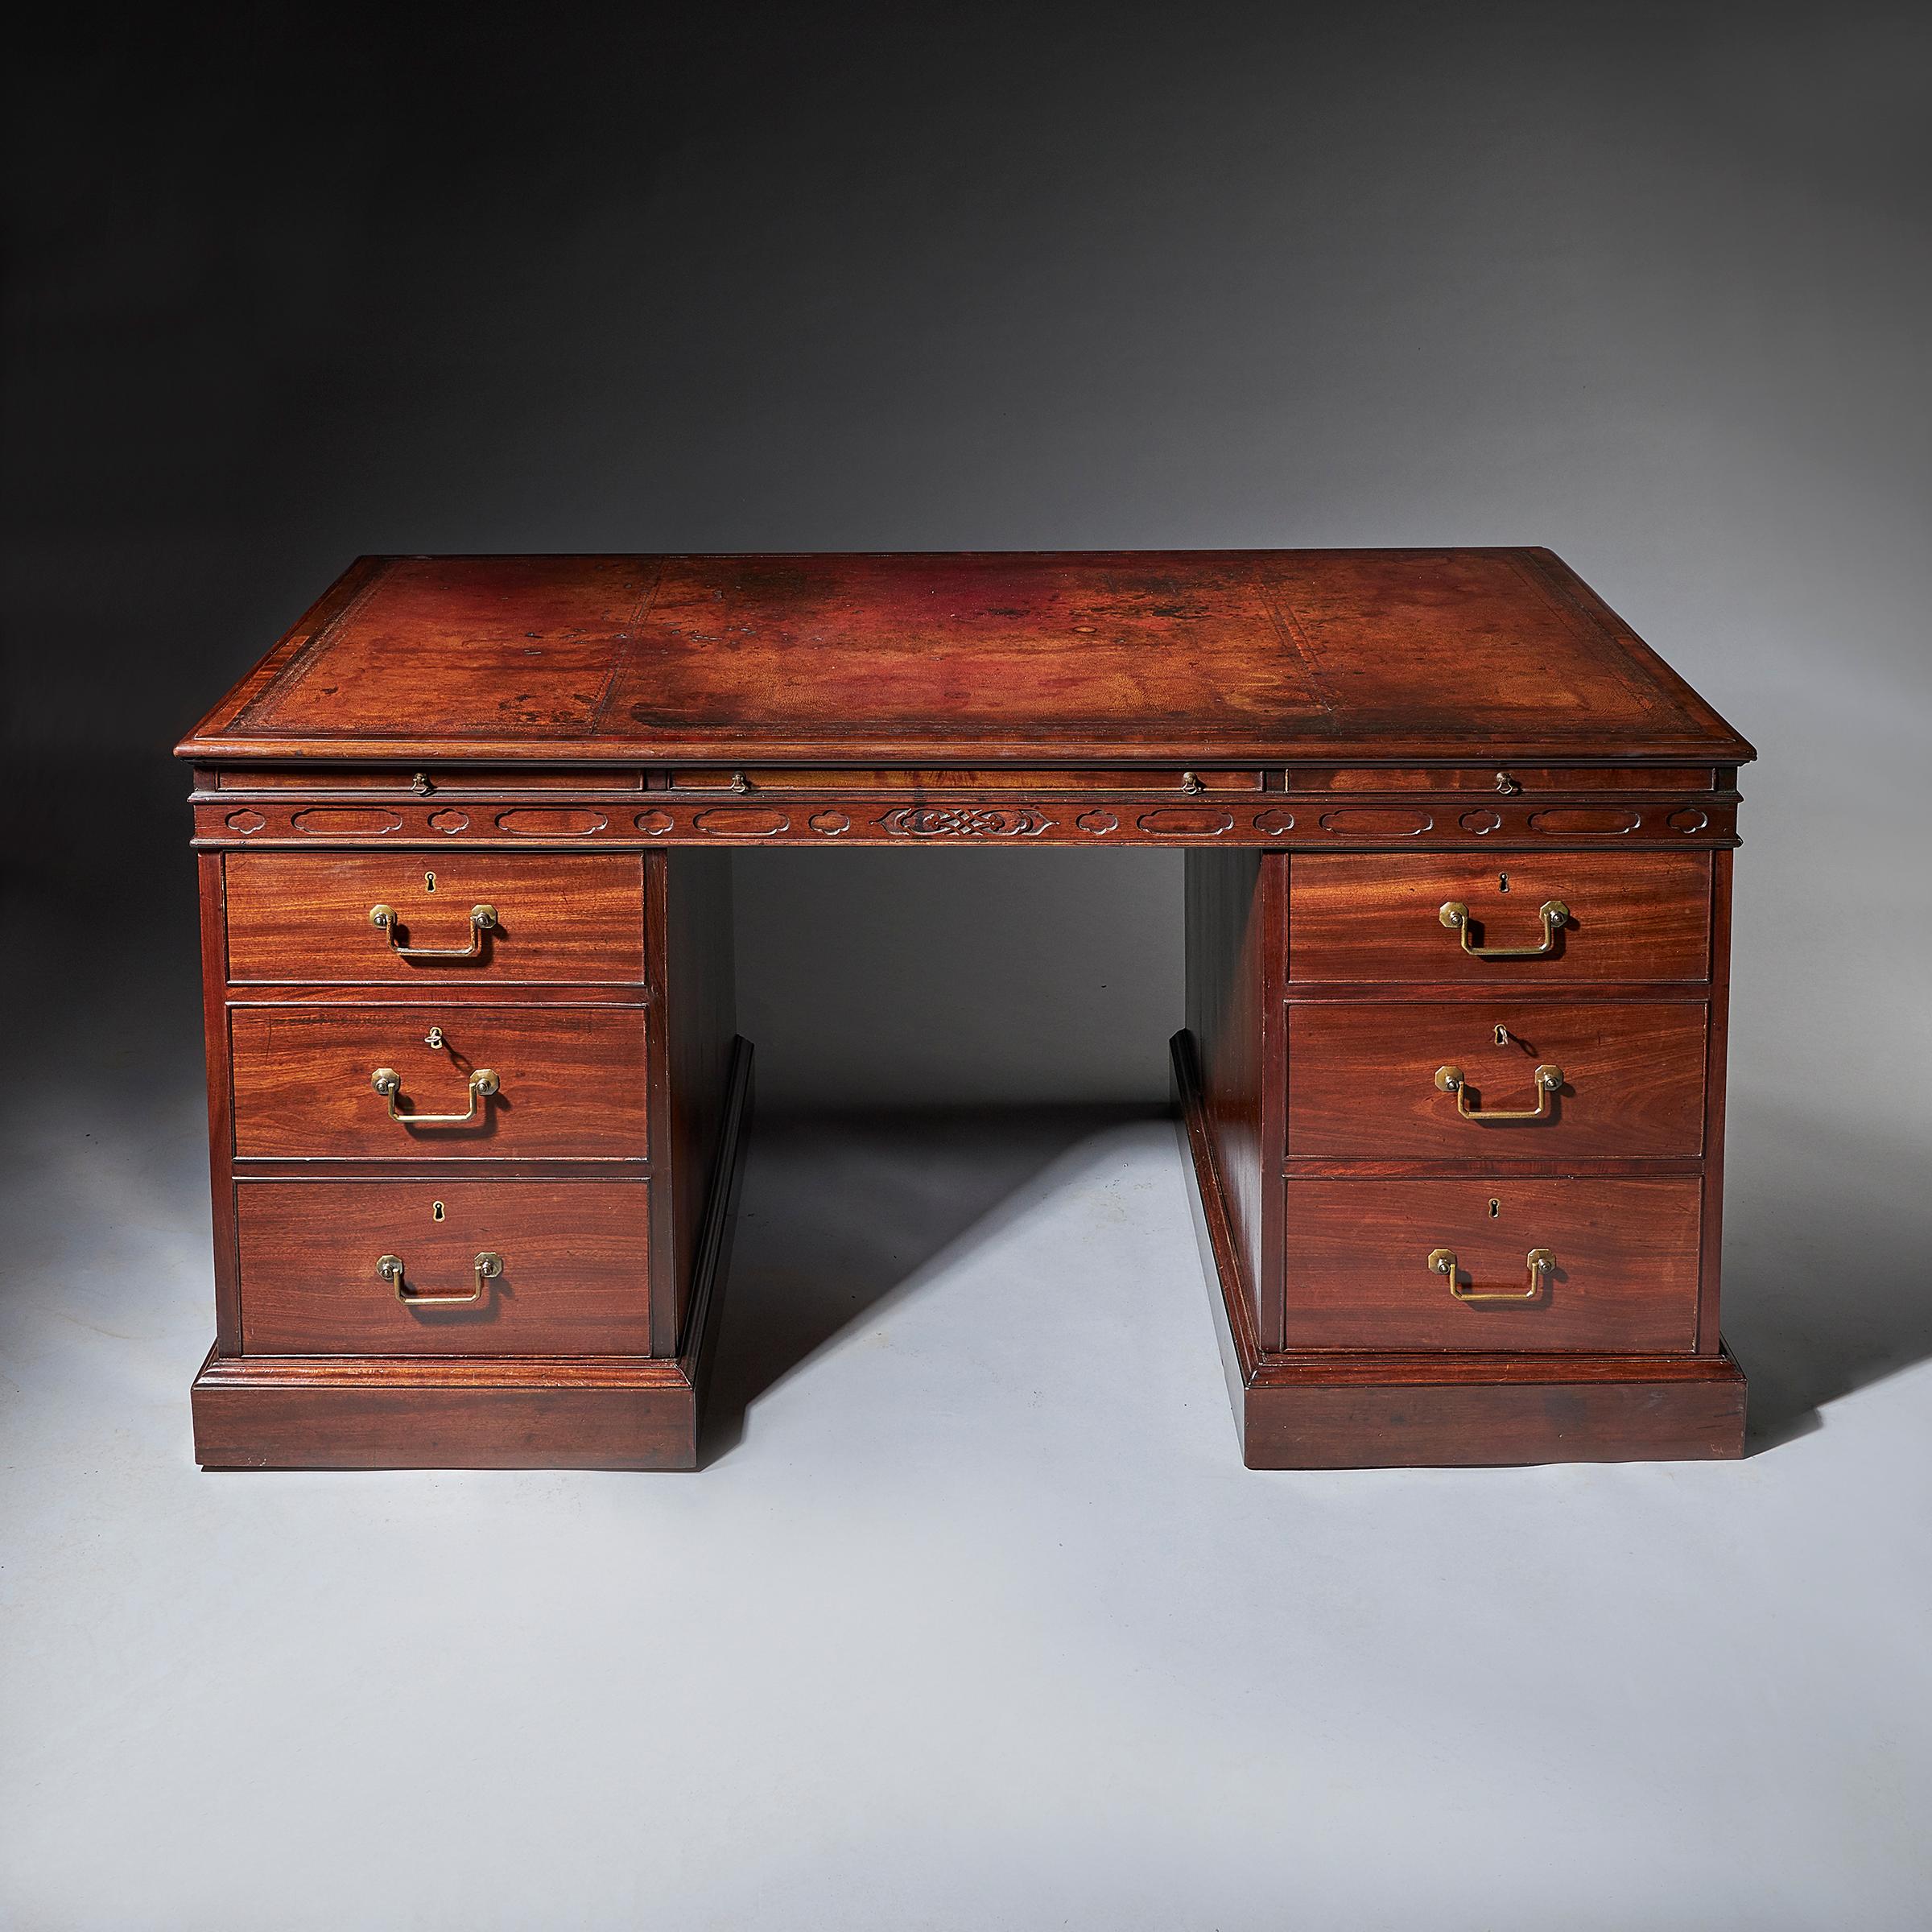 George III 18th Century Chippendale Period Mahogany Partners Desk In Good Condition For Sale In Oxfordshire, United Kingdom